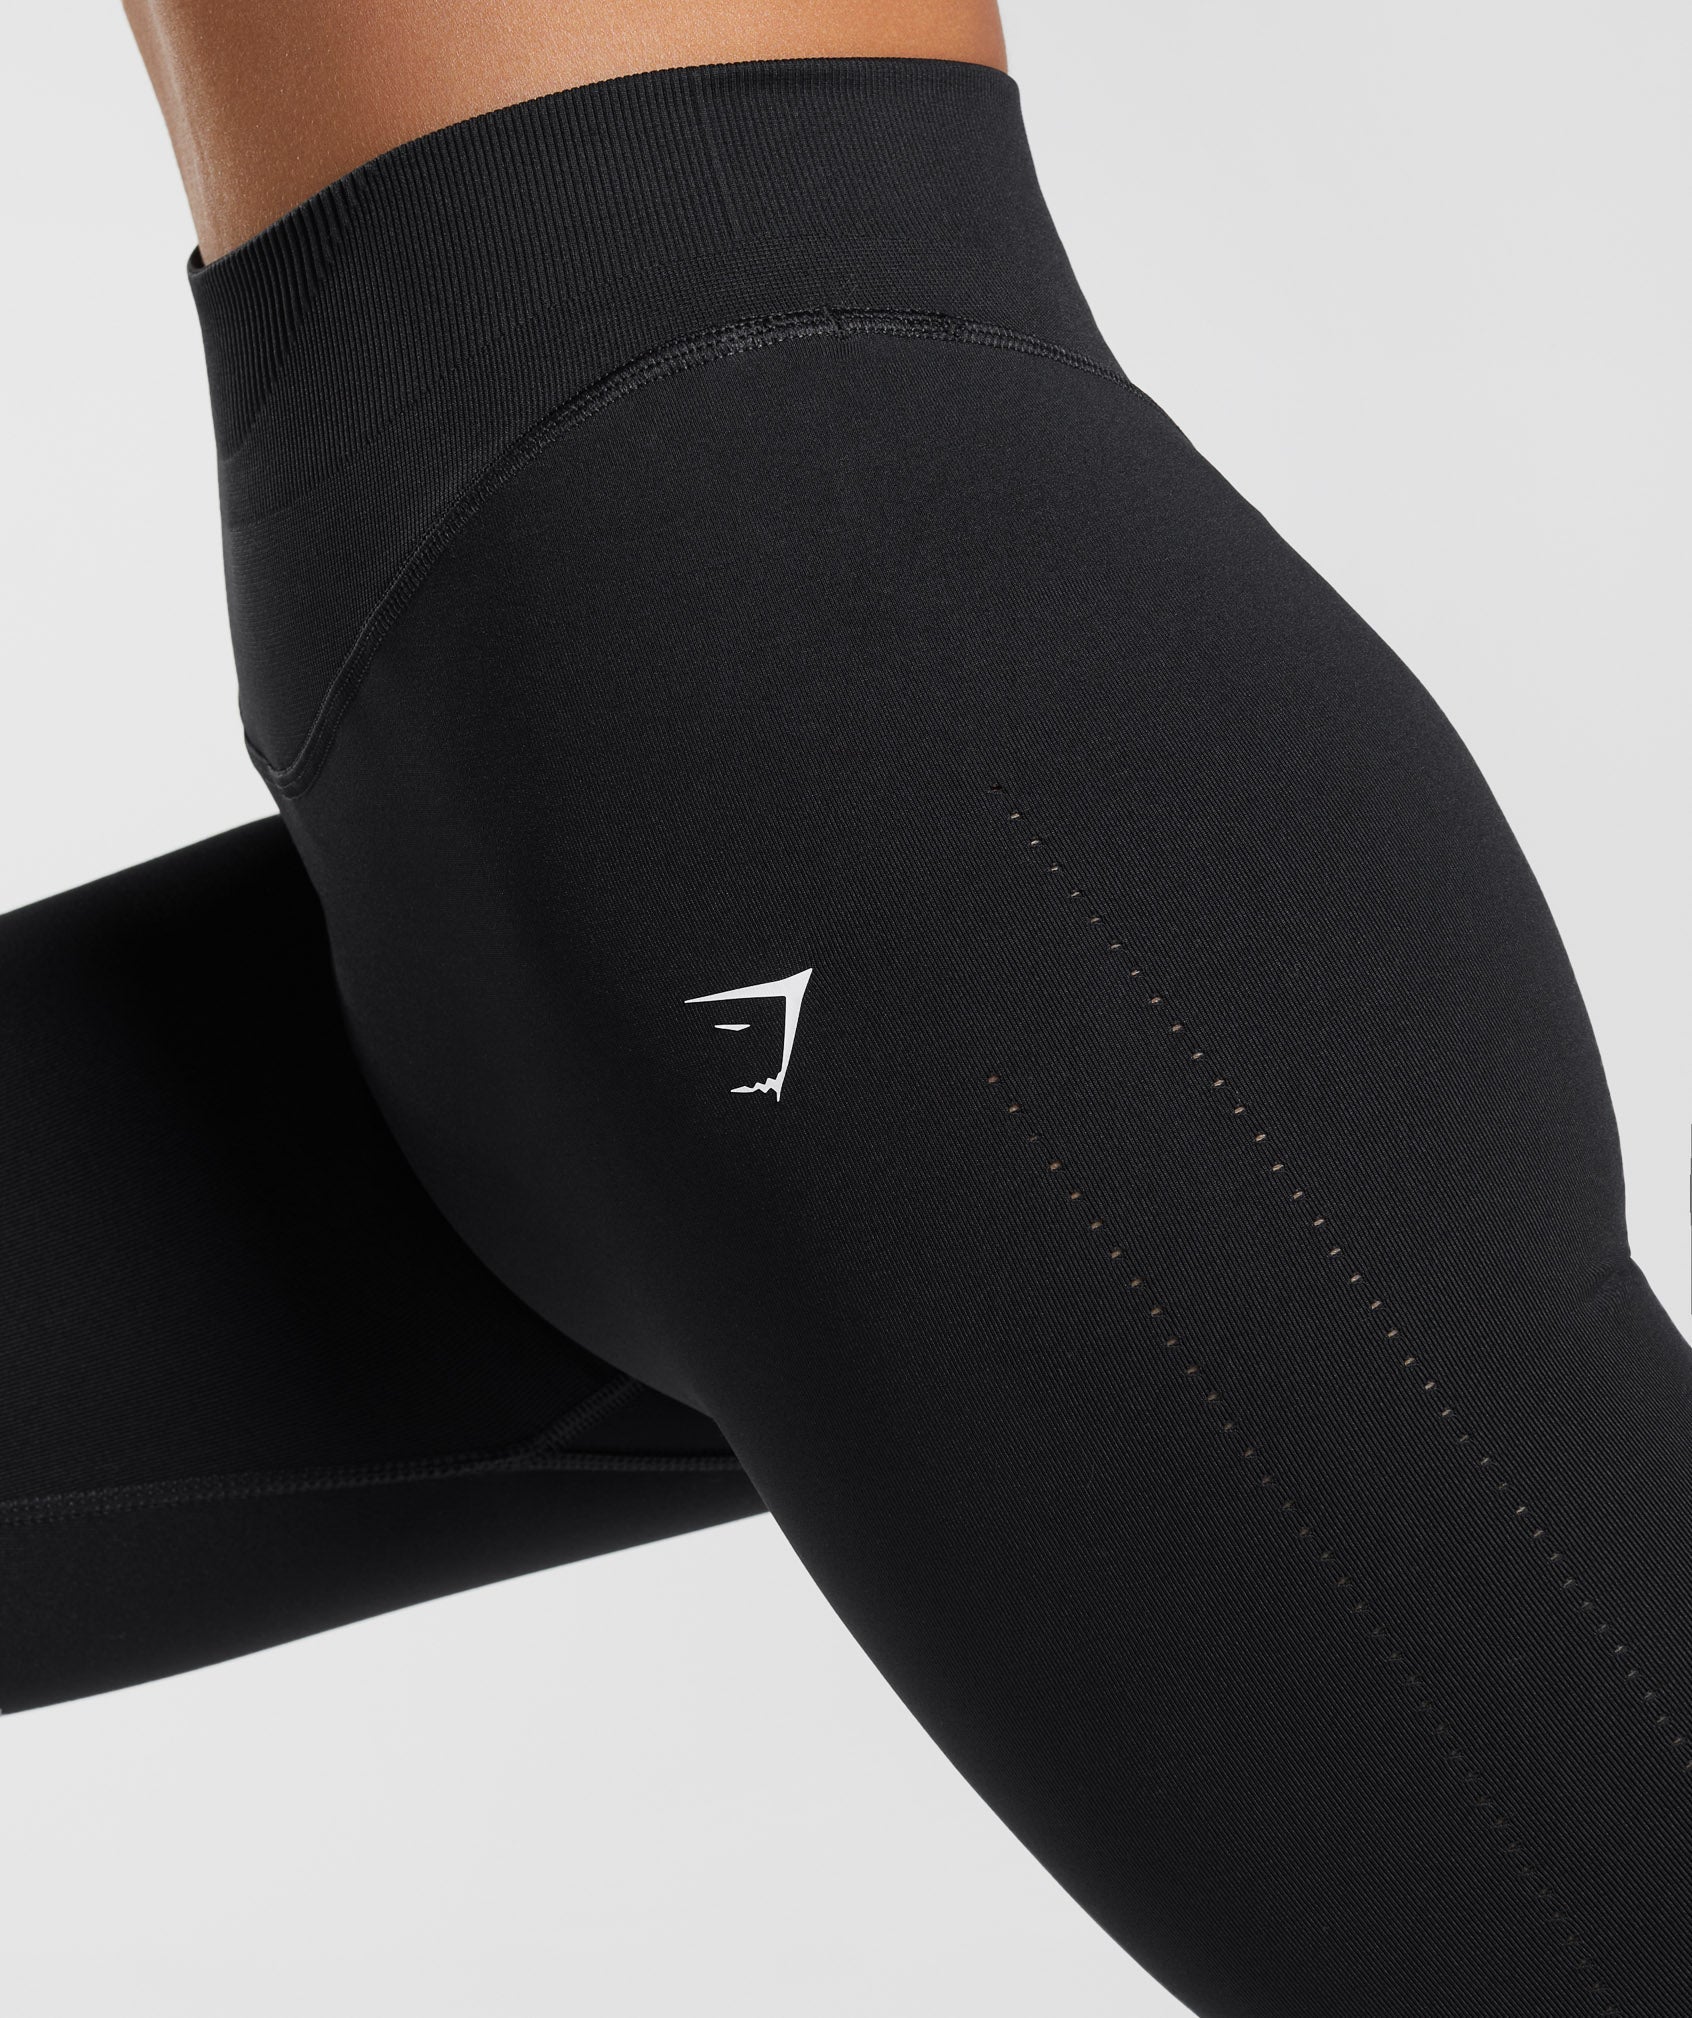 Crotch Sweat Stands No Chance Against These Seamless Leggings